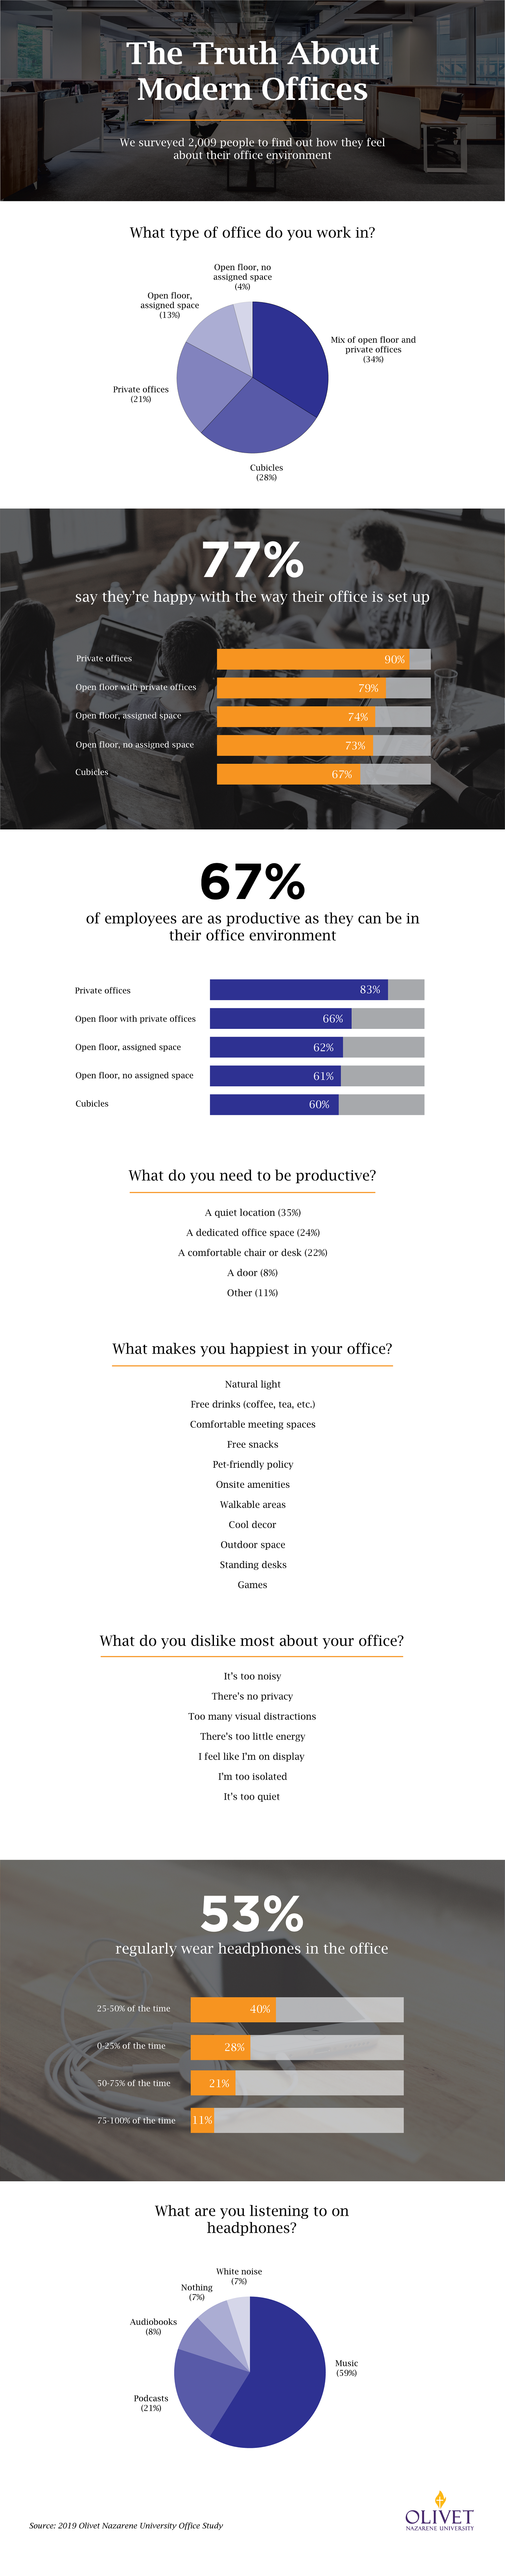 Modern American workplace trends for 2020 #infographic